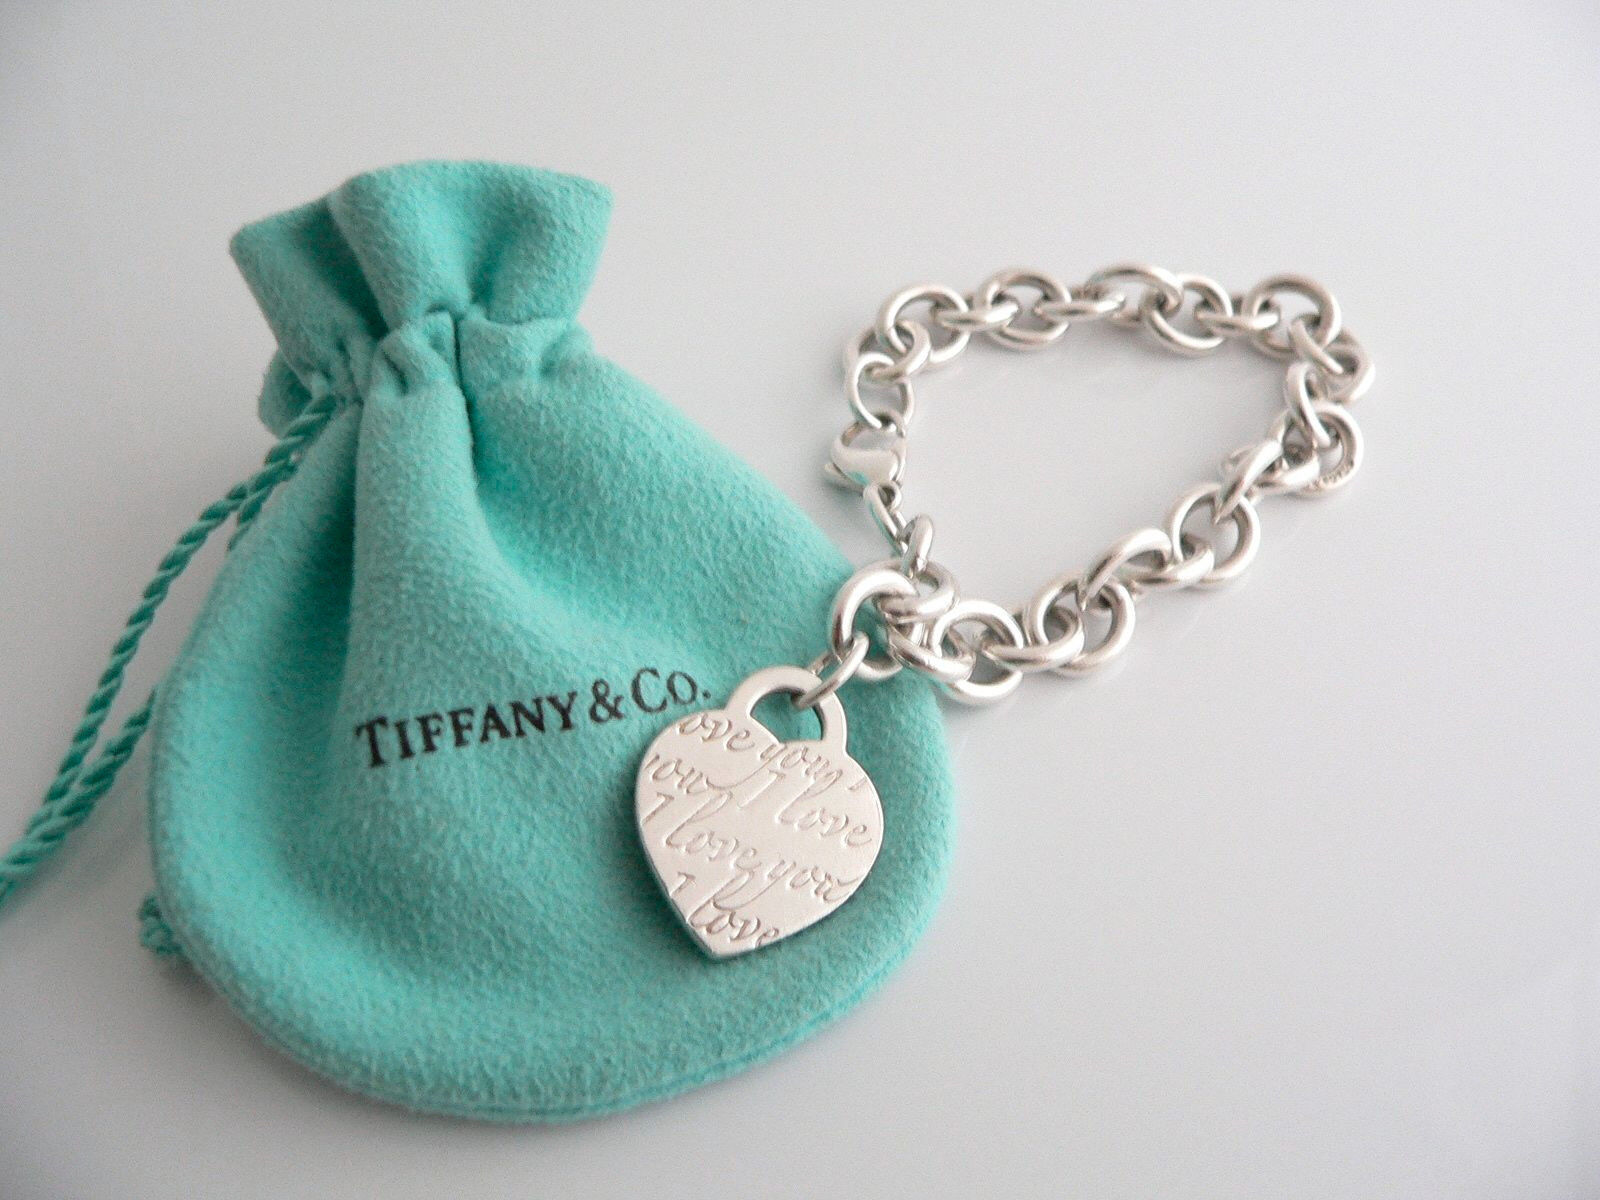 Tiffany & Co Silver I Love You Heart Bracelet Charm Pendant Chain Gift Pouch - $468.00